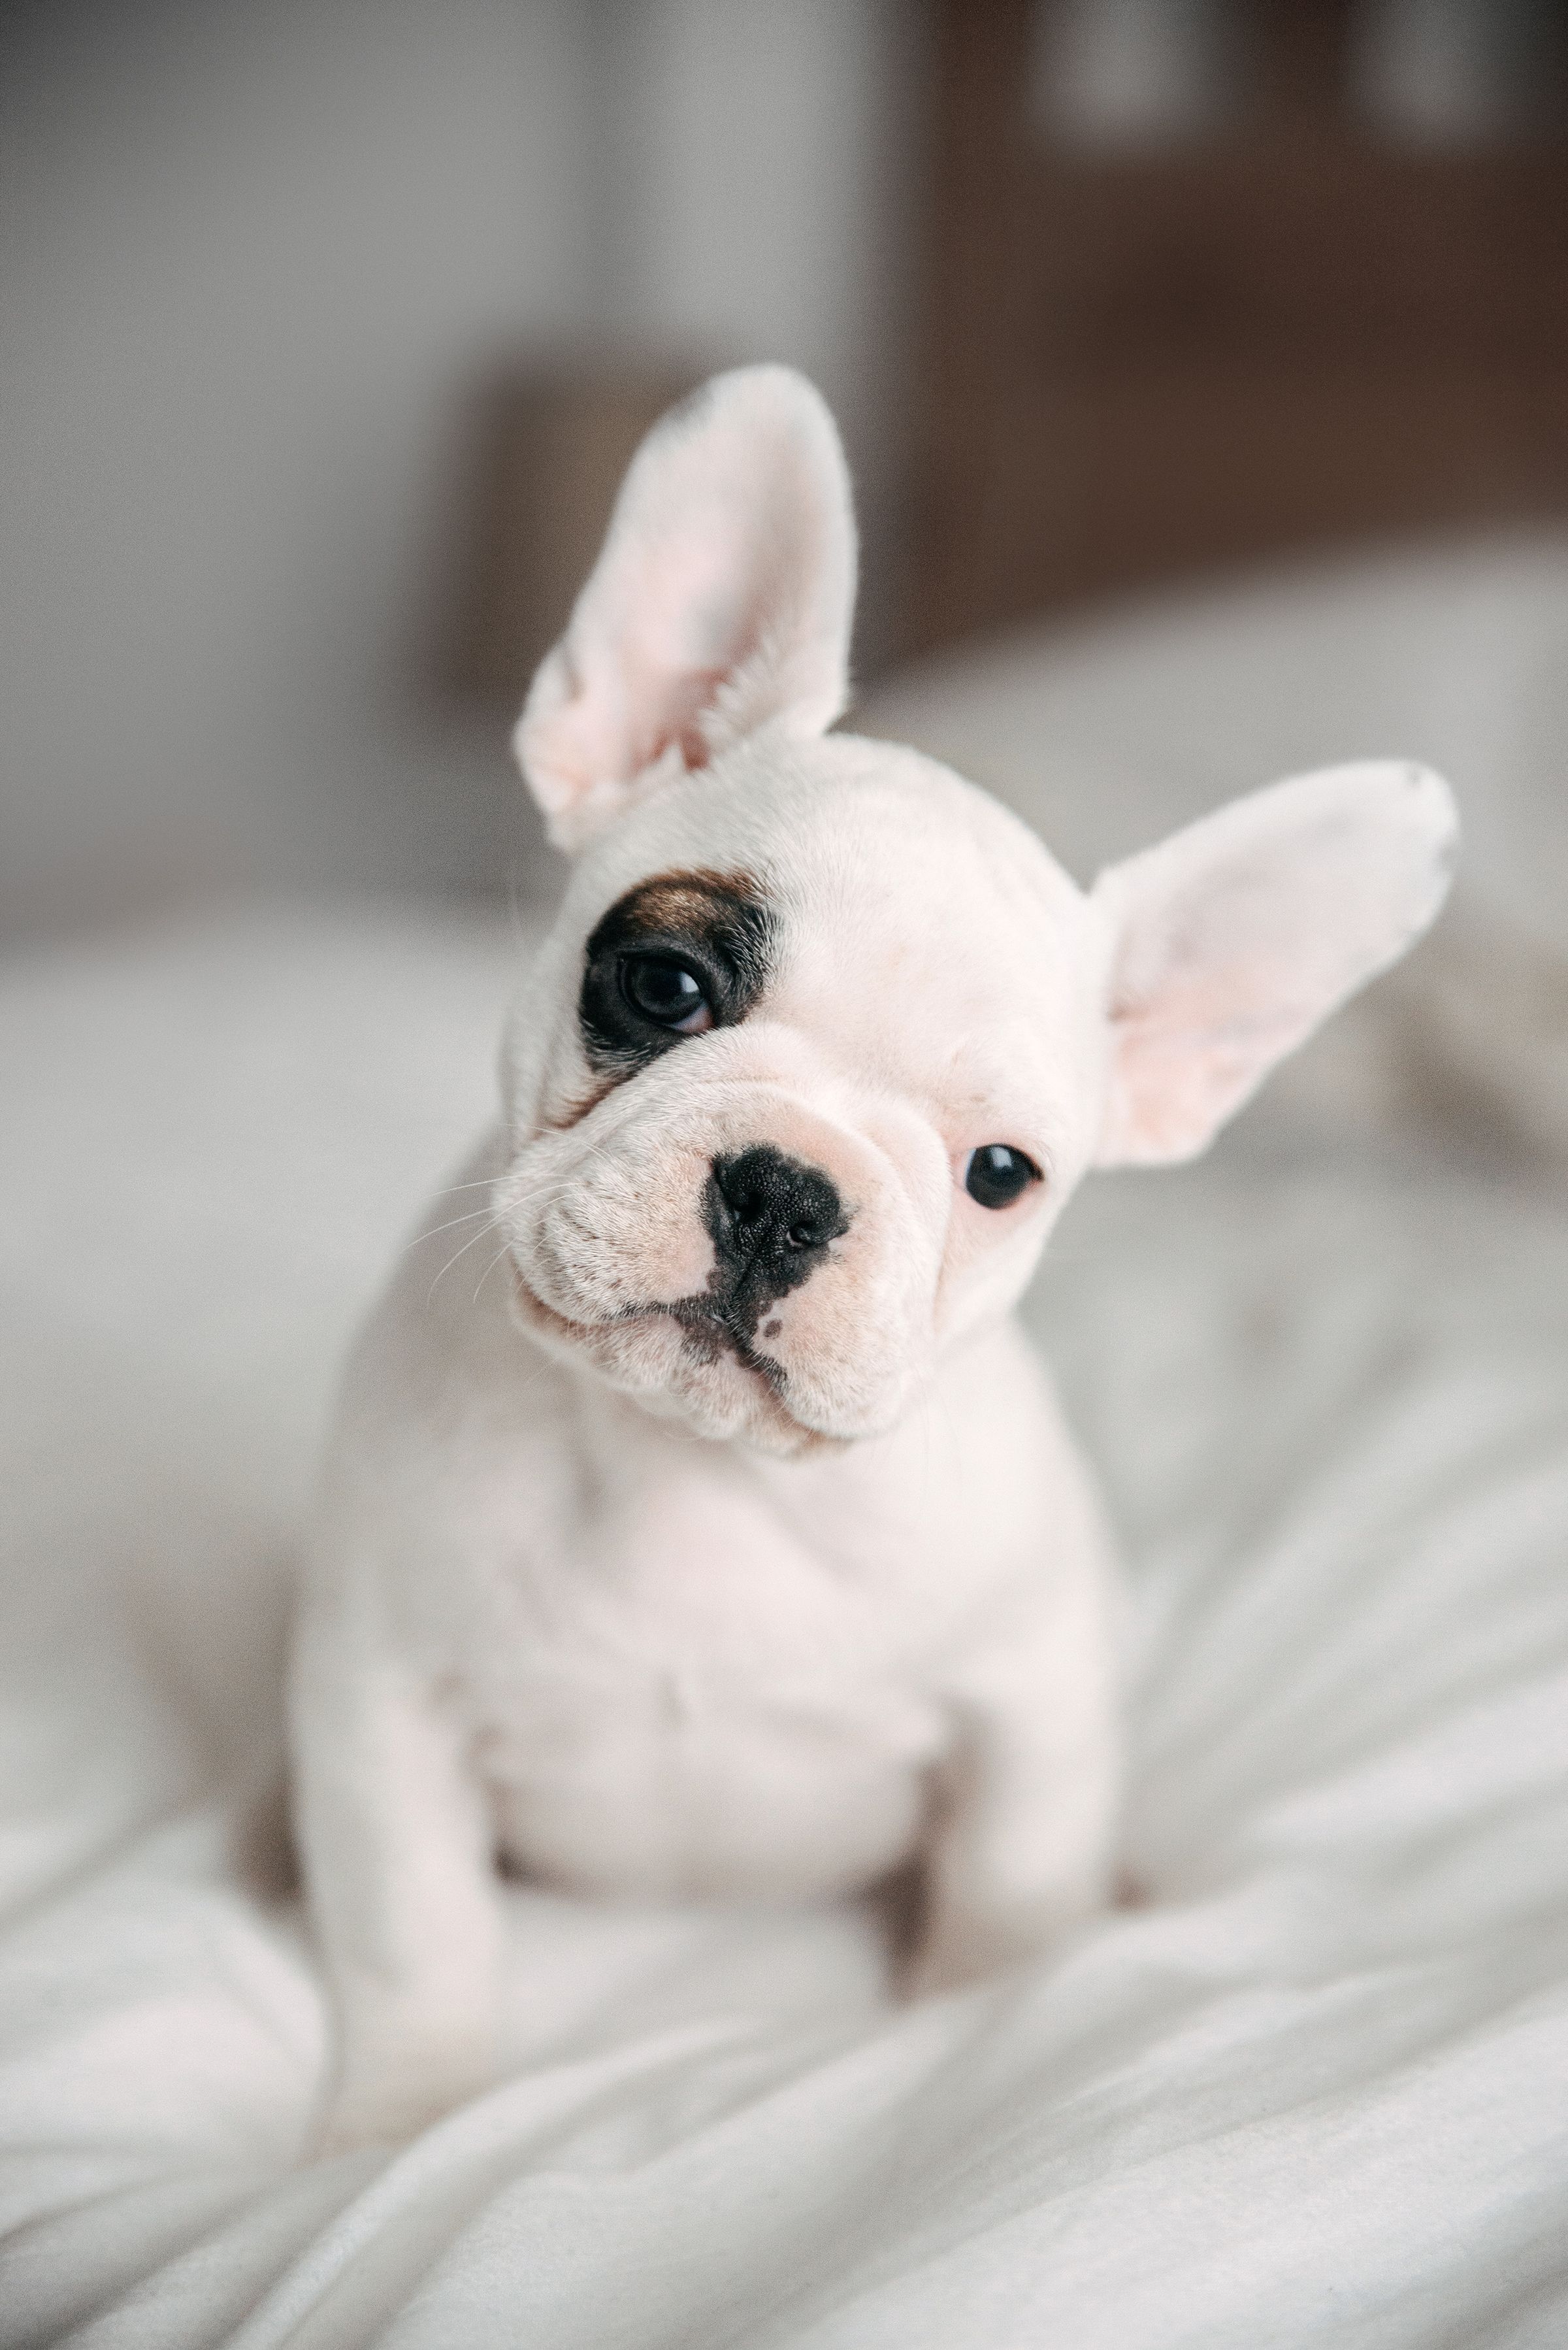 A French Bulldog puppy sitting on the bed while tilting its head